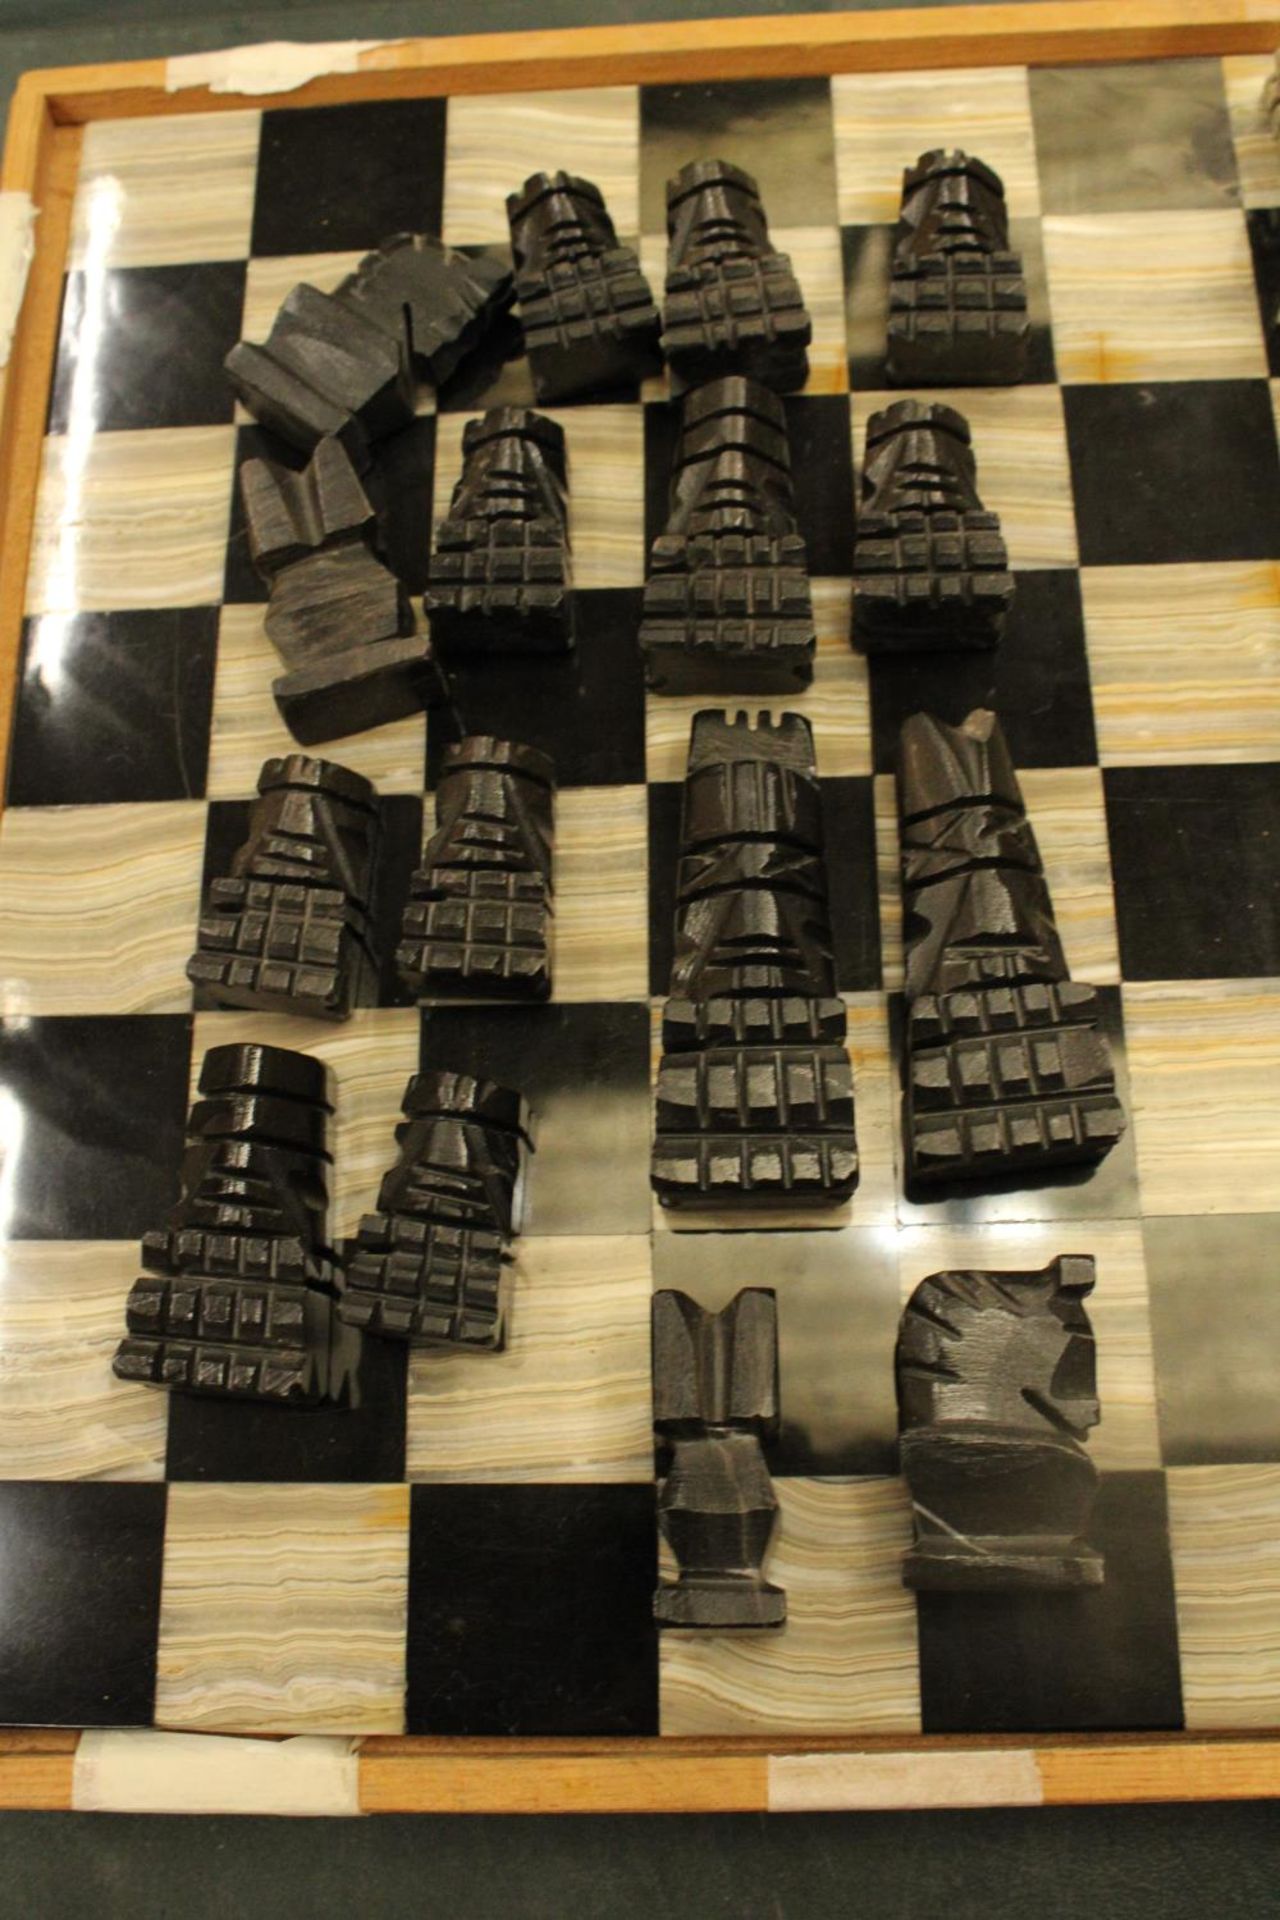 A COMPLETE MARBLE AND STONE CHESS SET WITH CARVED PIECES - Image 5 of 5